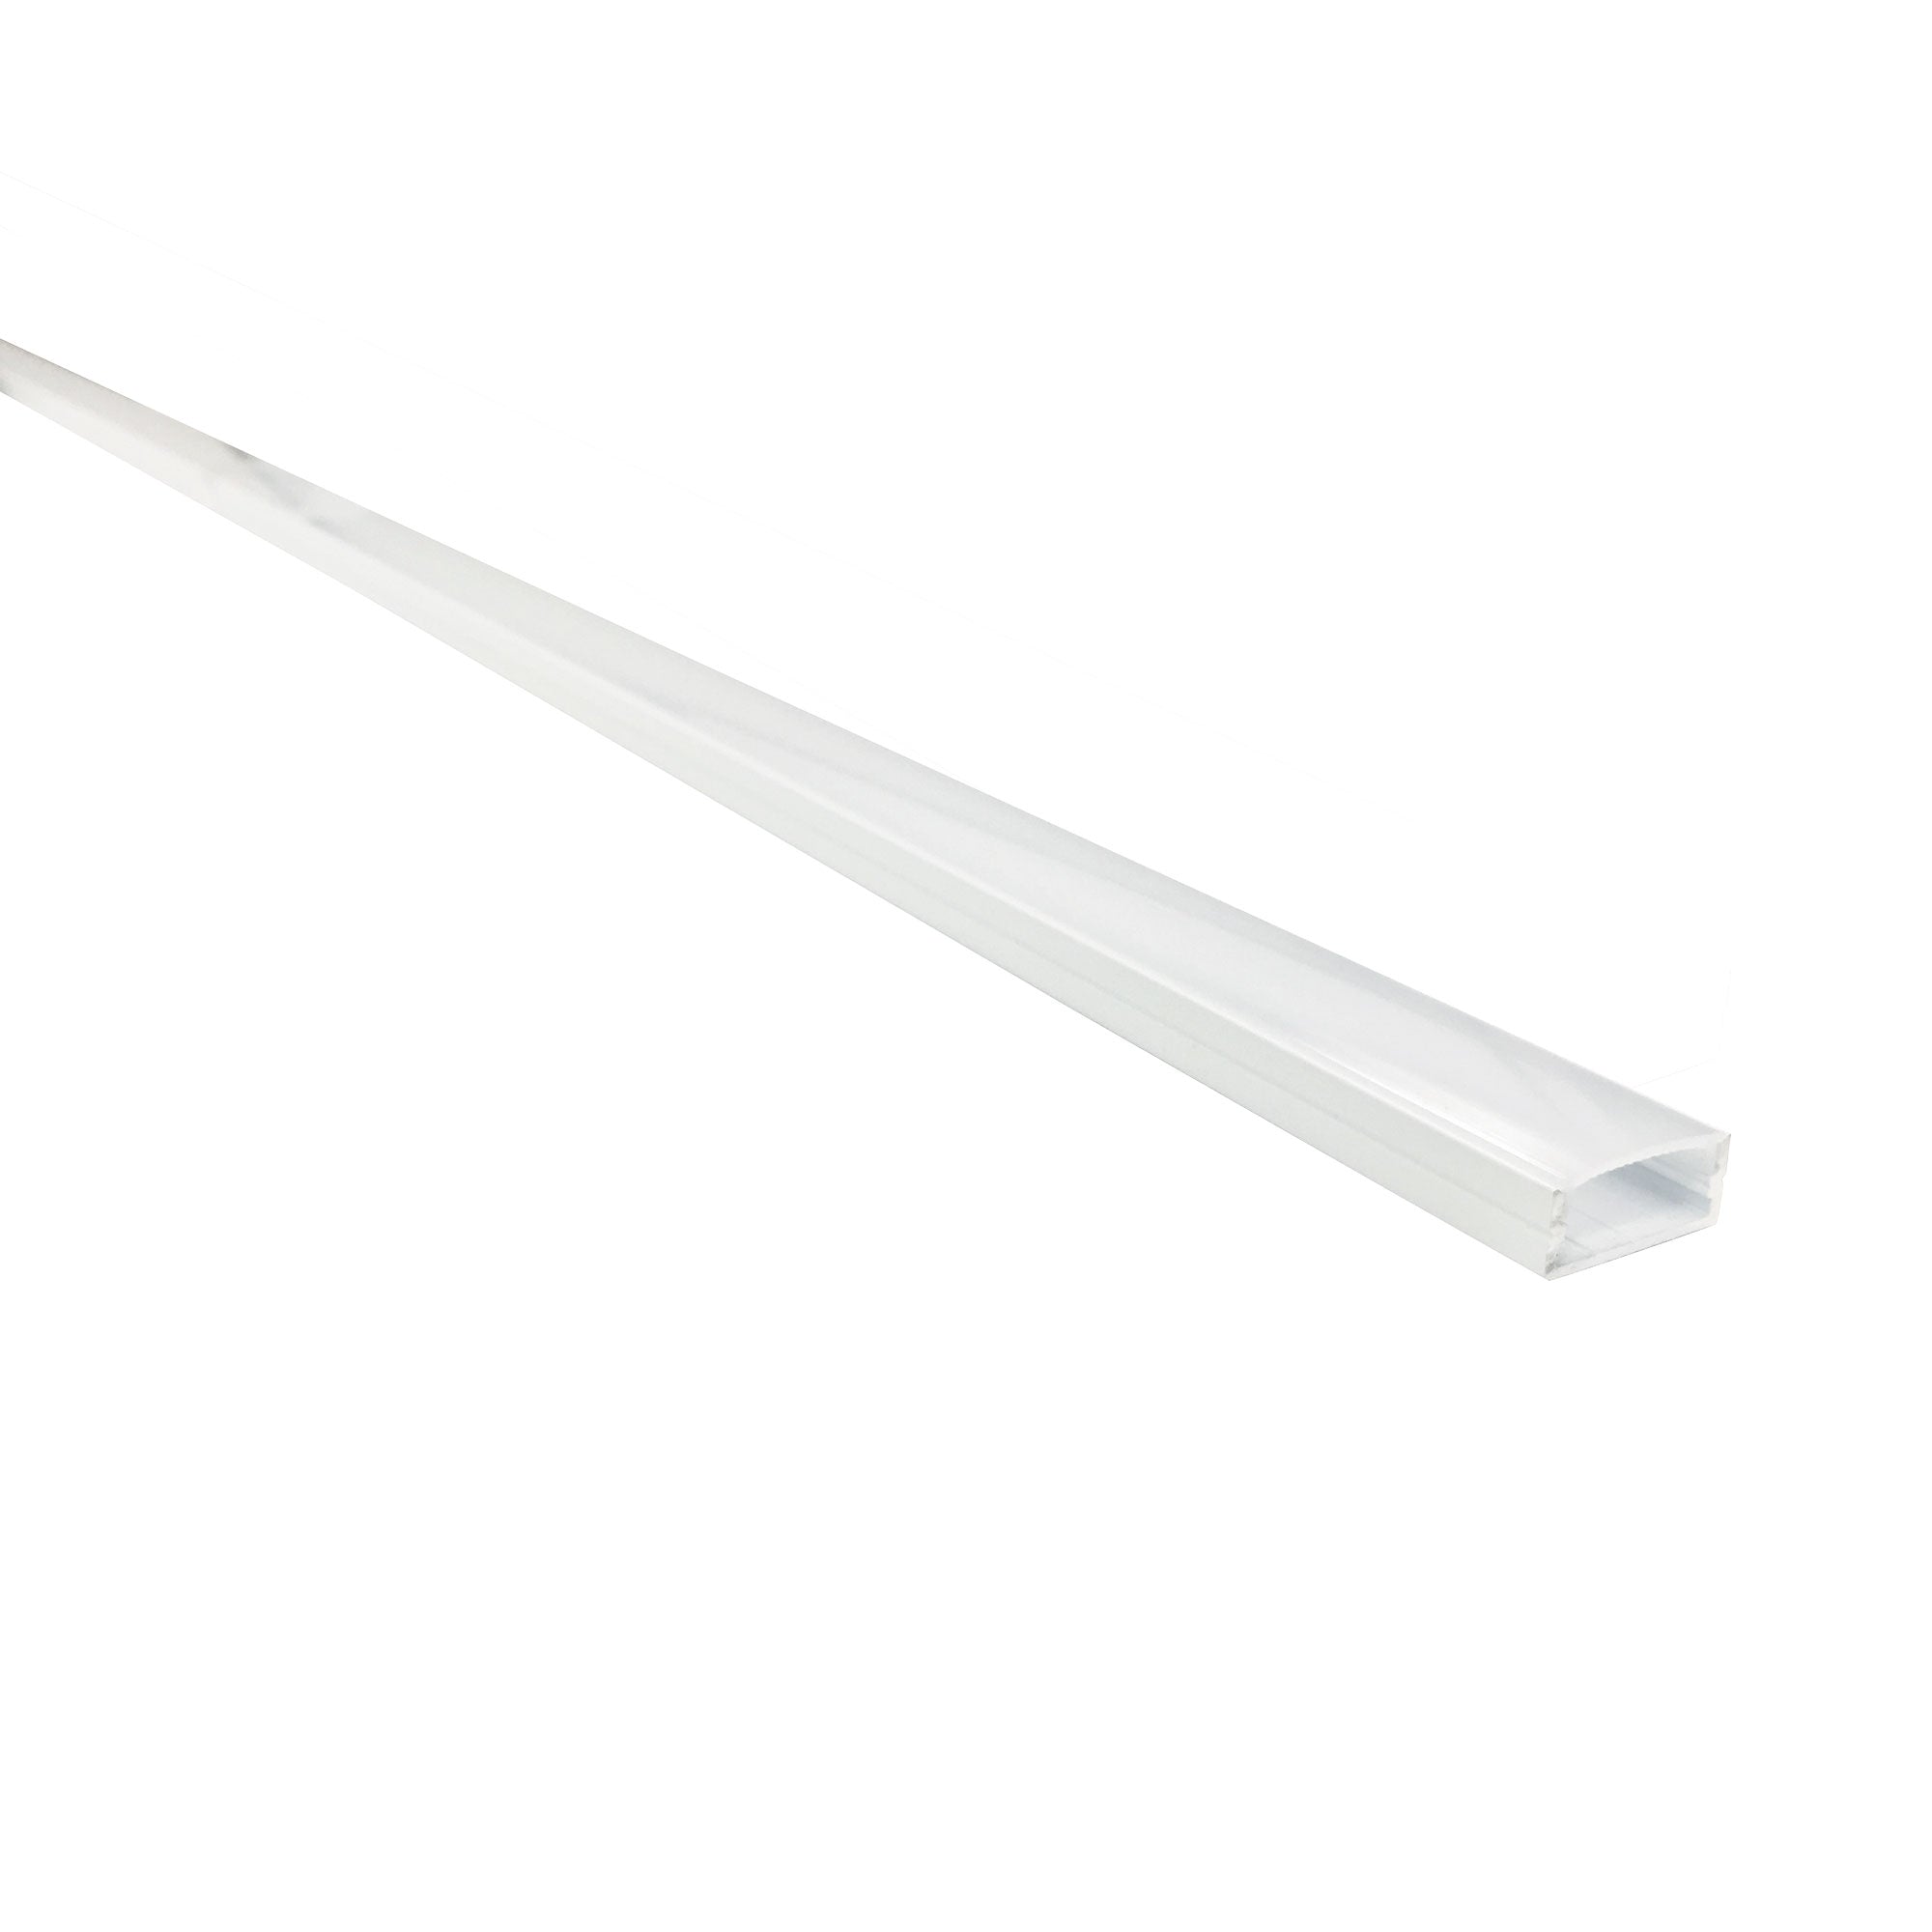 Nora Lighting NATL-C24W - Accent / Undercabinet - 4-ft Shallow Channel, White (Plastic Diffuser and End Caps Included)